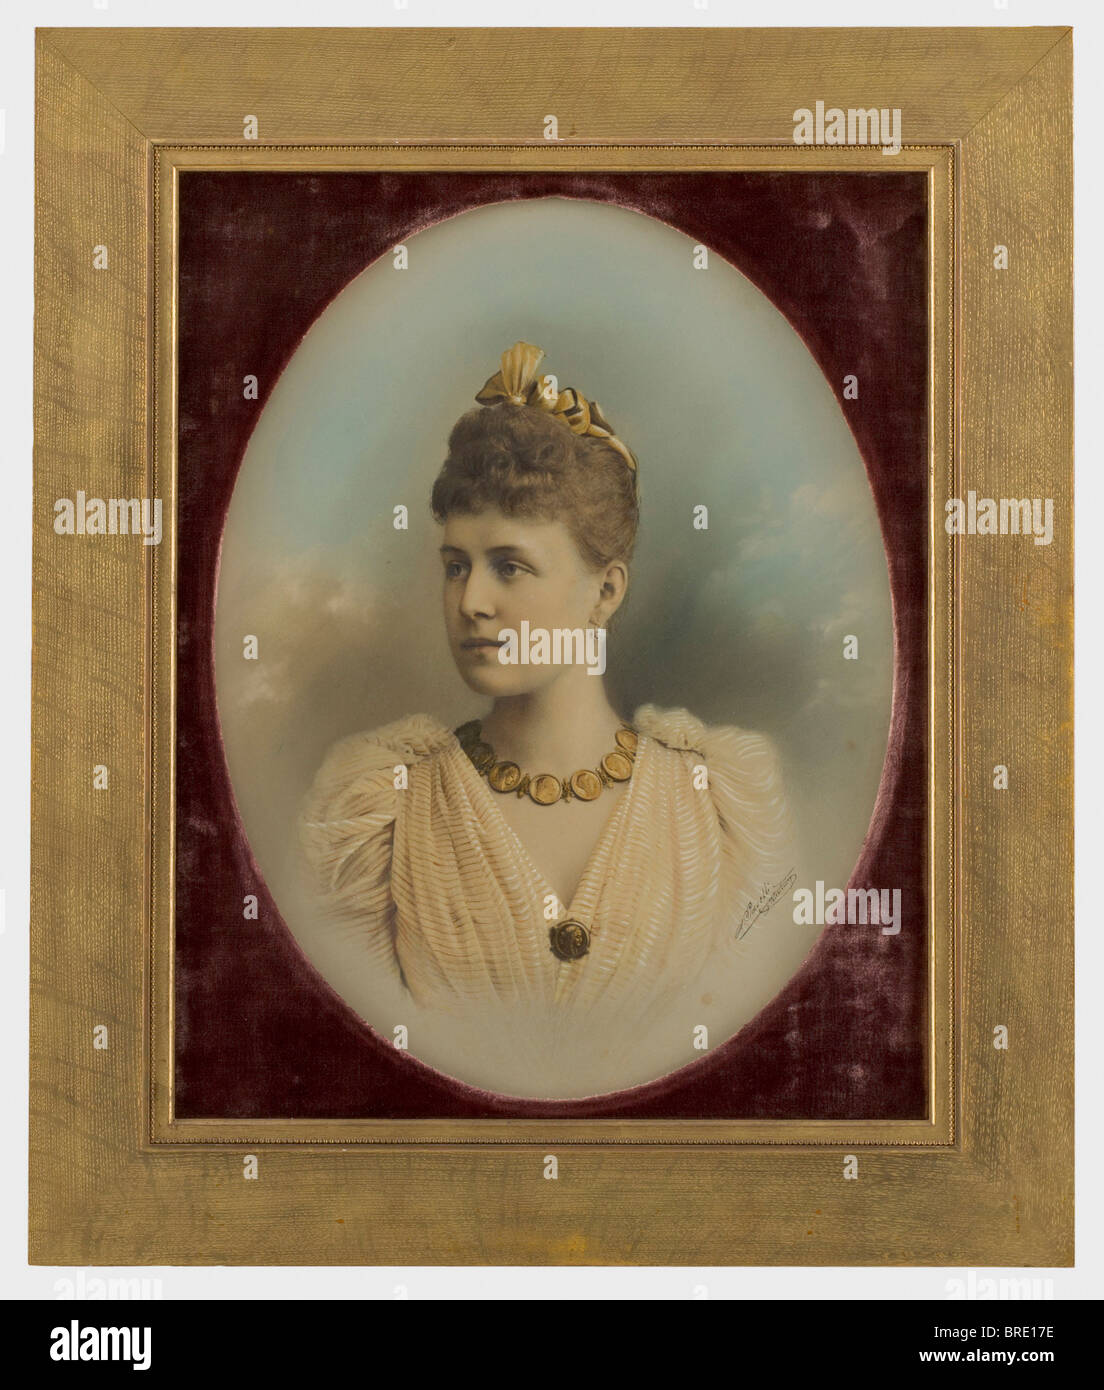 A portrait of the Grand Duchess Alexandra Georgijevna (1870 - 1891), a coloured, vertically oval photograph With the ink signature of the court photographer, 'A. Pasetti, St. Petersbourg' on the right edge. In a gilt wooden frame, under glass, in wine red velvet passepartout, picture dimensions 6.5 x 42.5 cm, framed dimensions 77.5 x 65.3 cm. Label on the back, 'H.V.v.W. G.v.R. Privateigentum No. 444' for the Duchess Vera of Württemberg, Grand Duchess of Russia. Alexander Ivanovich Pasetti studied at the St. Petersburg Art Academy and won a silver medal there i, Stock Photo